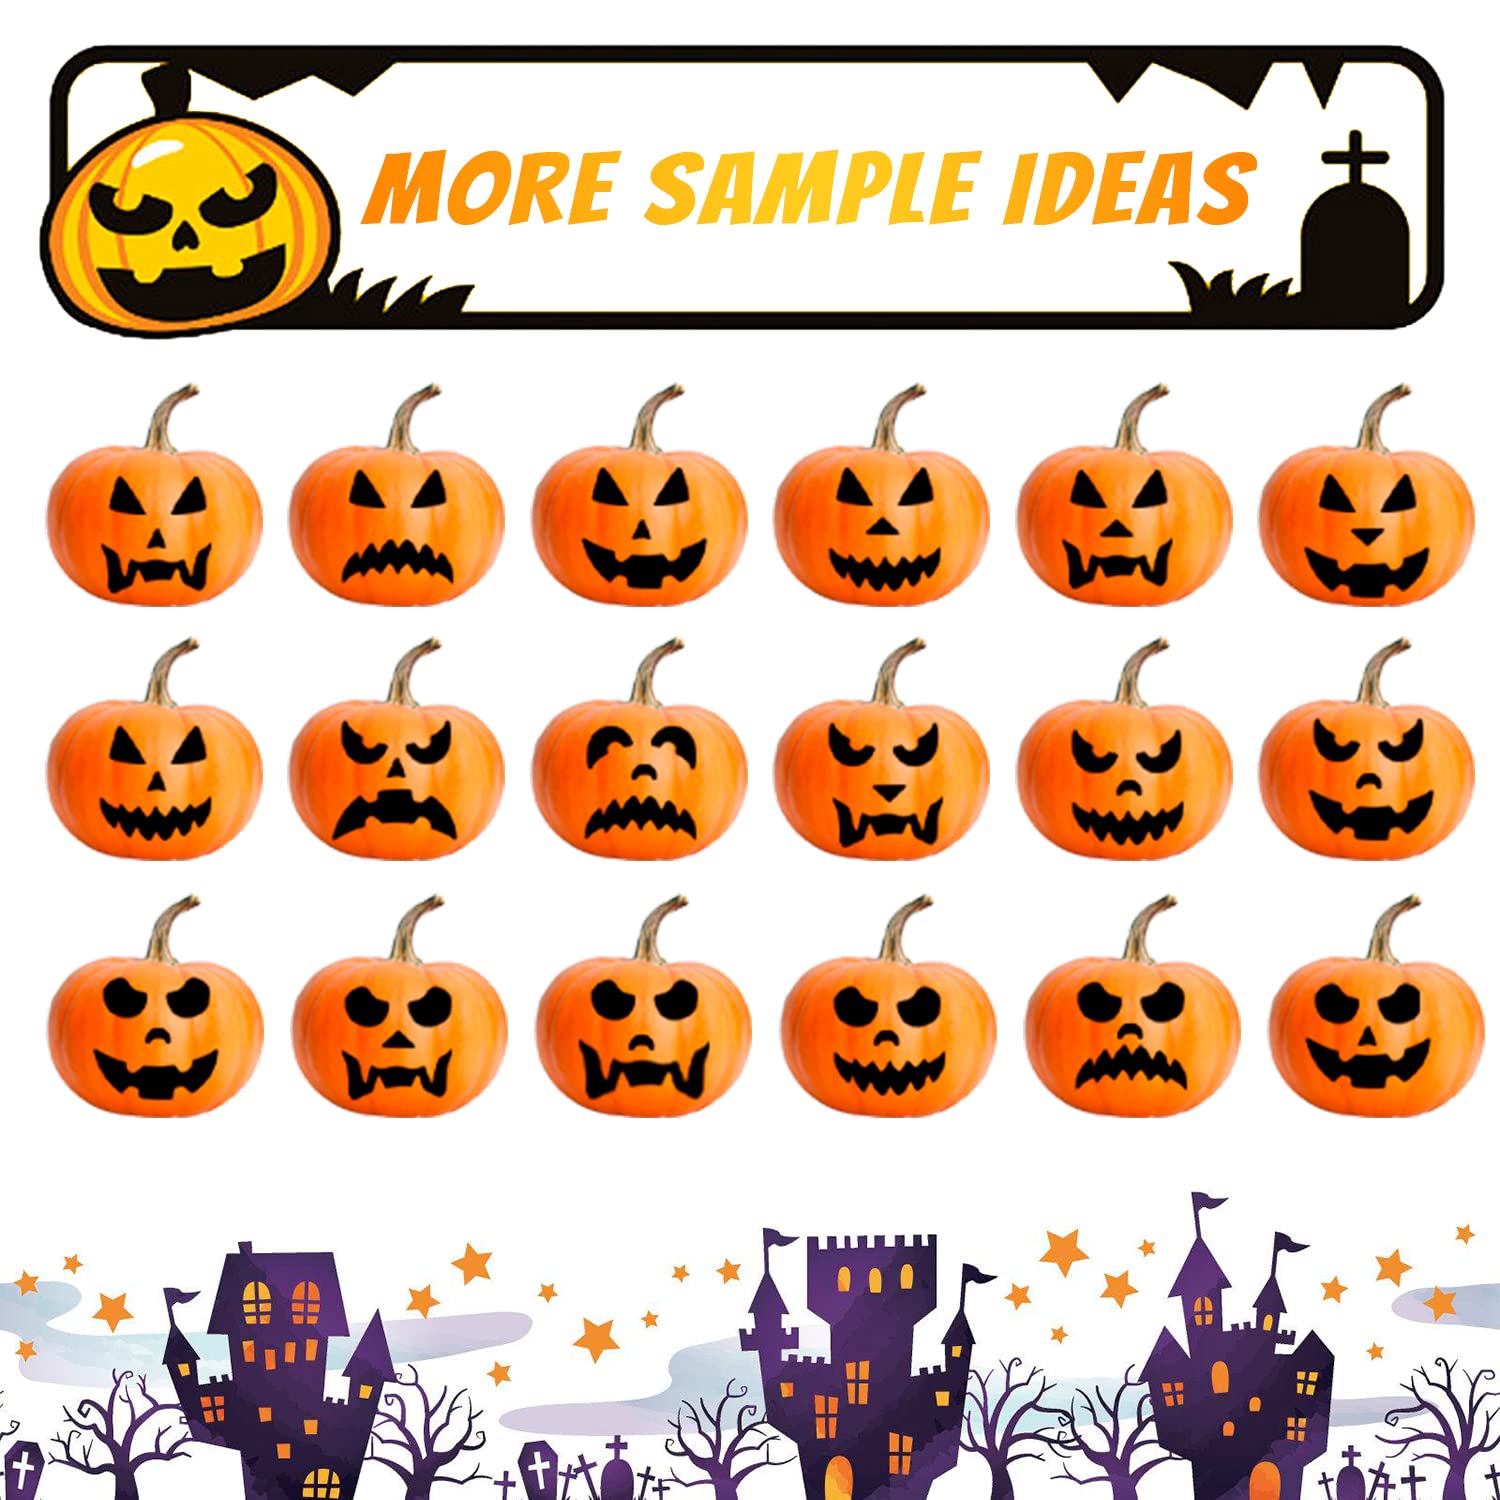 ButyHome 33 PCS Pumpkin Carving Kit, Stainless Steel Tools with Hammer DIY Stencils Pumpkin Carver Kit Carving Set for Halloween Decoration Safe for Kids Adults with 12 Candle Lights